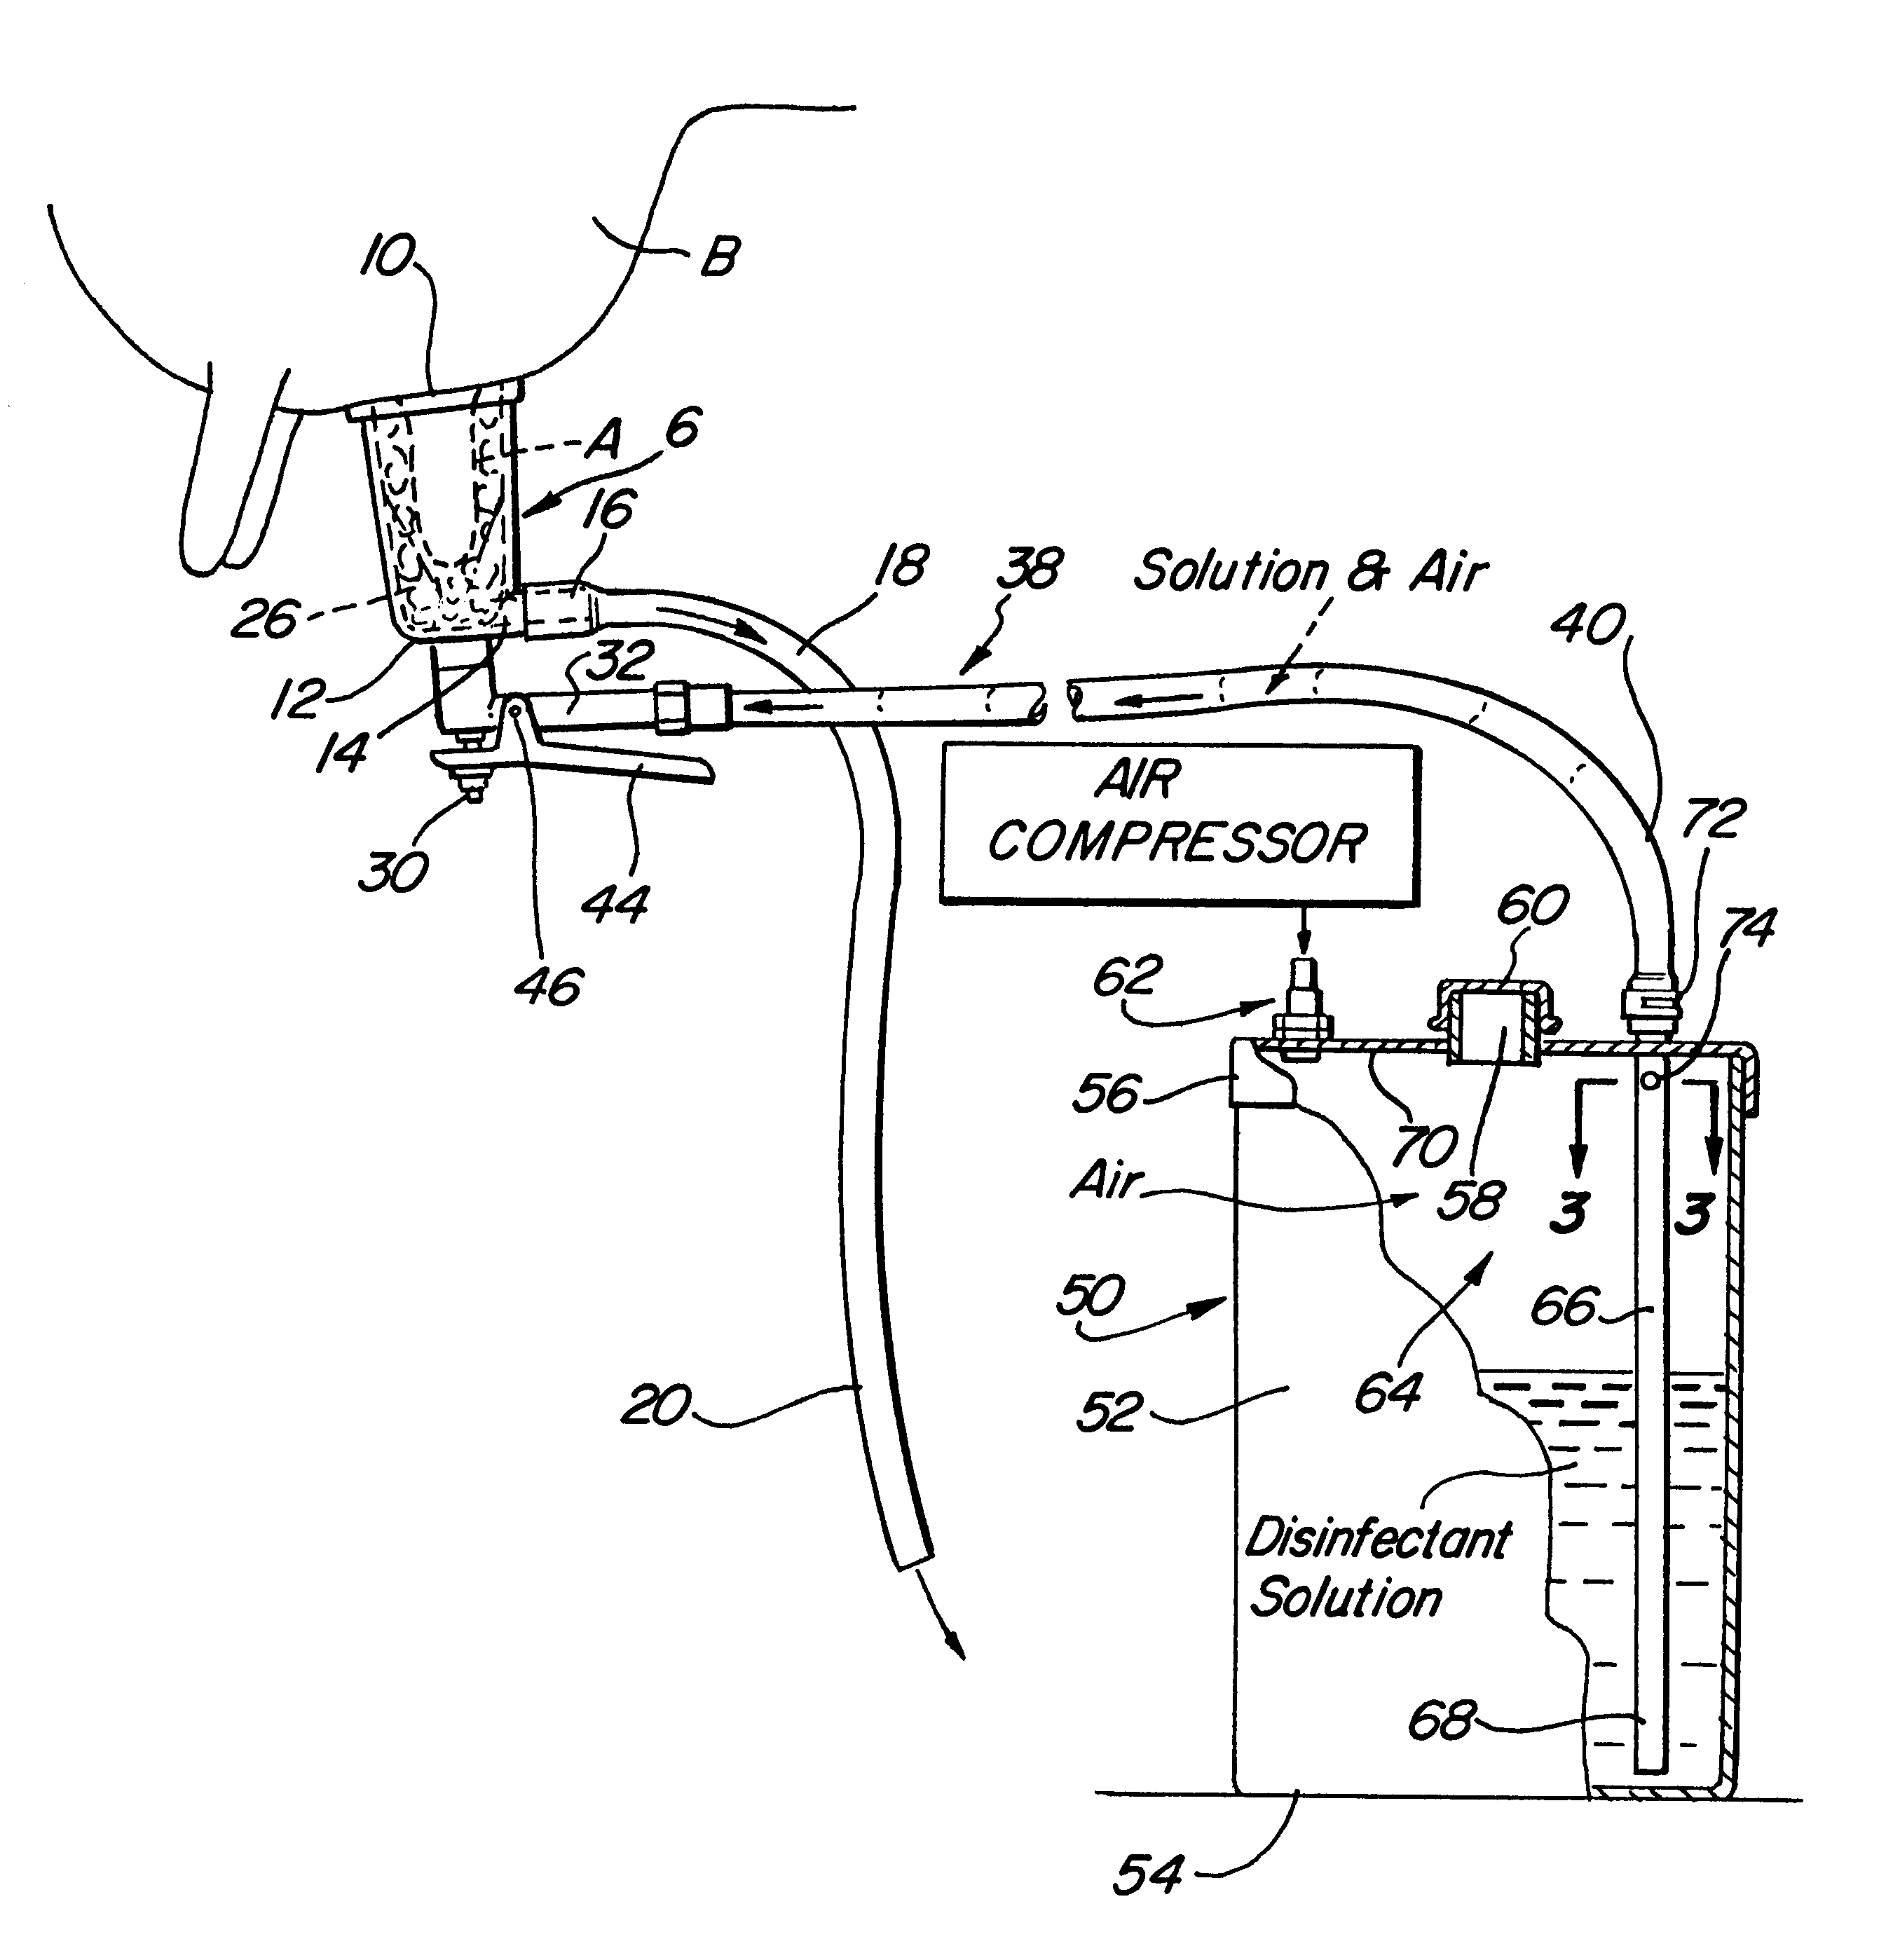 Apparatus and method for producing a foam bovine teat dip